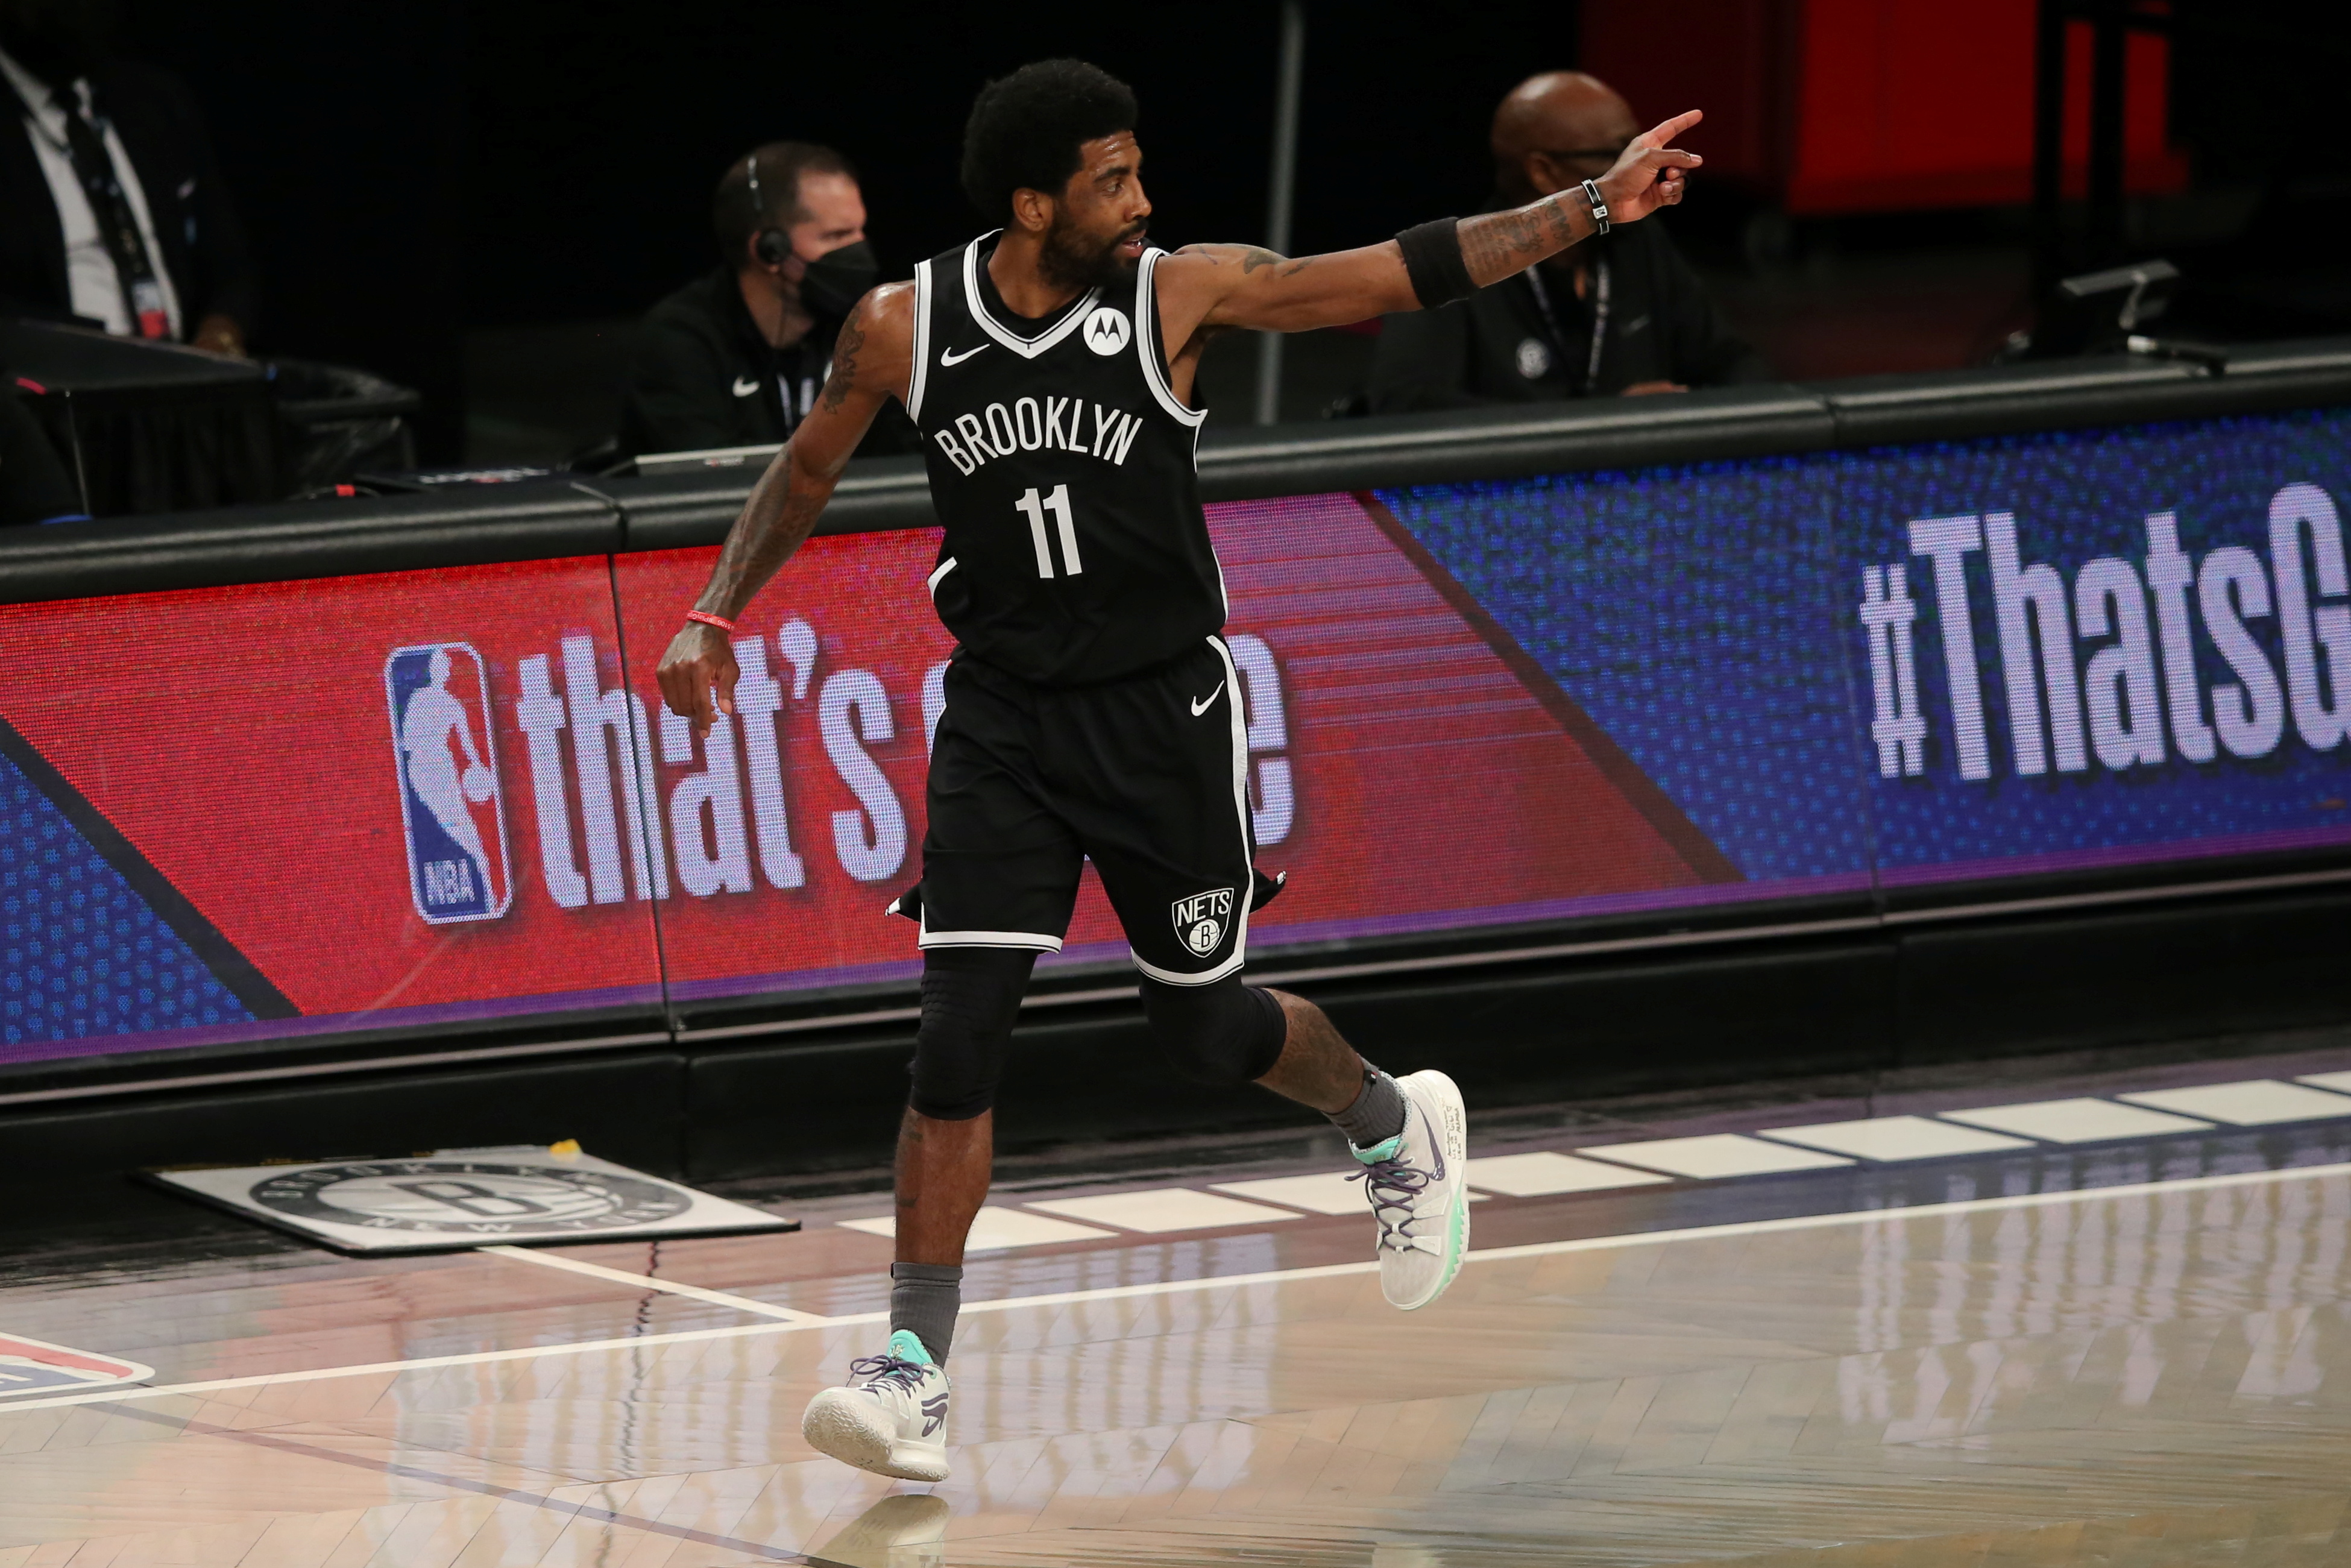 Brooklyn Nets say Kyrie Irving will not play until vaccination